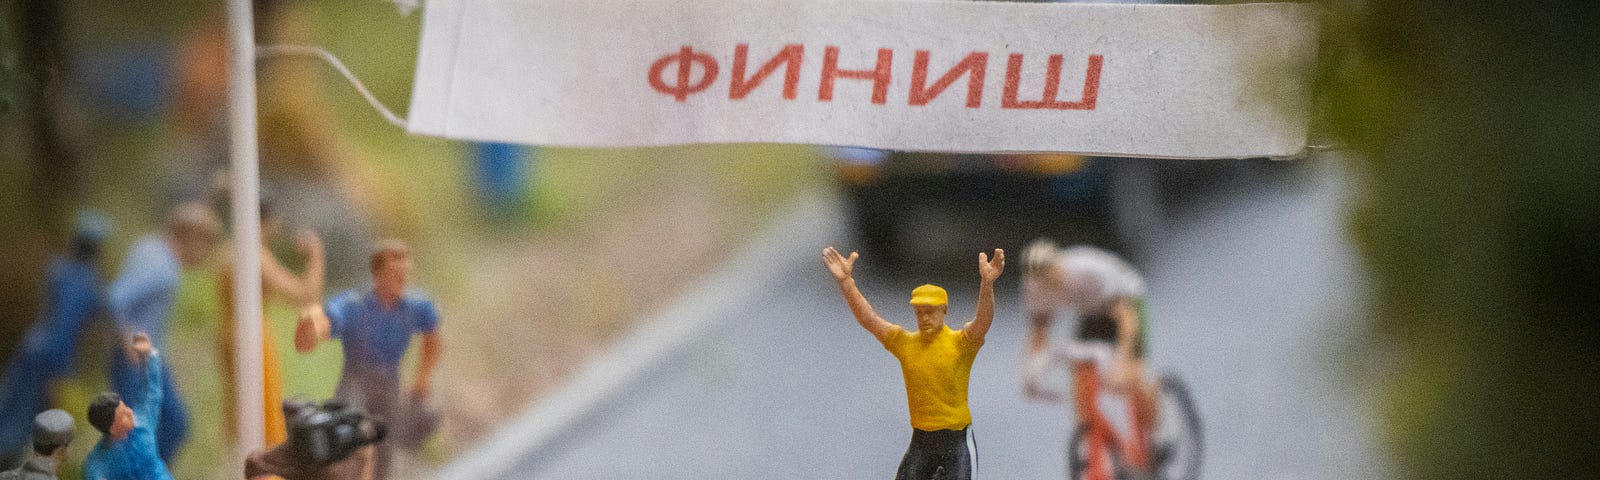 Cyclist crossing the finish line, with both hands raised in victory.